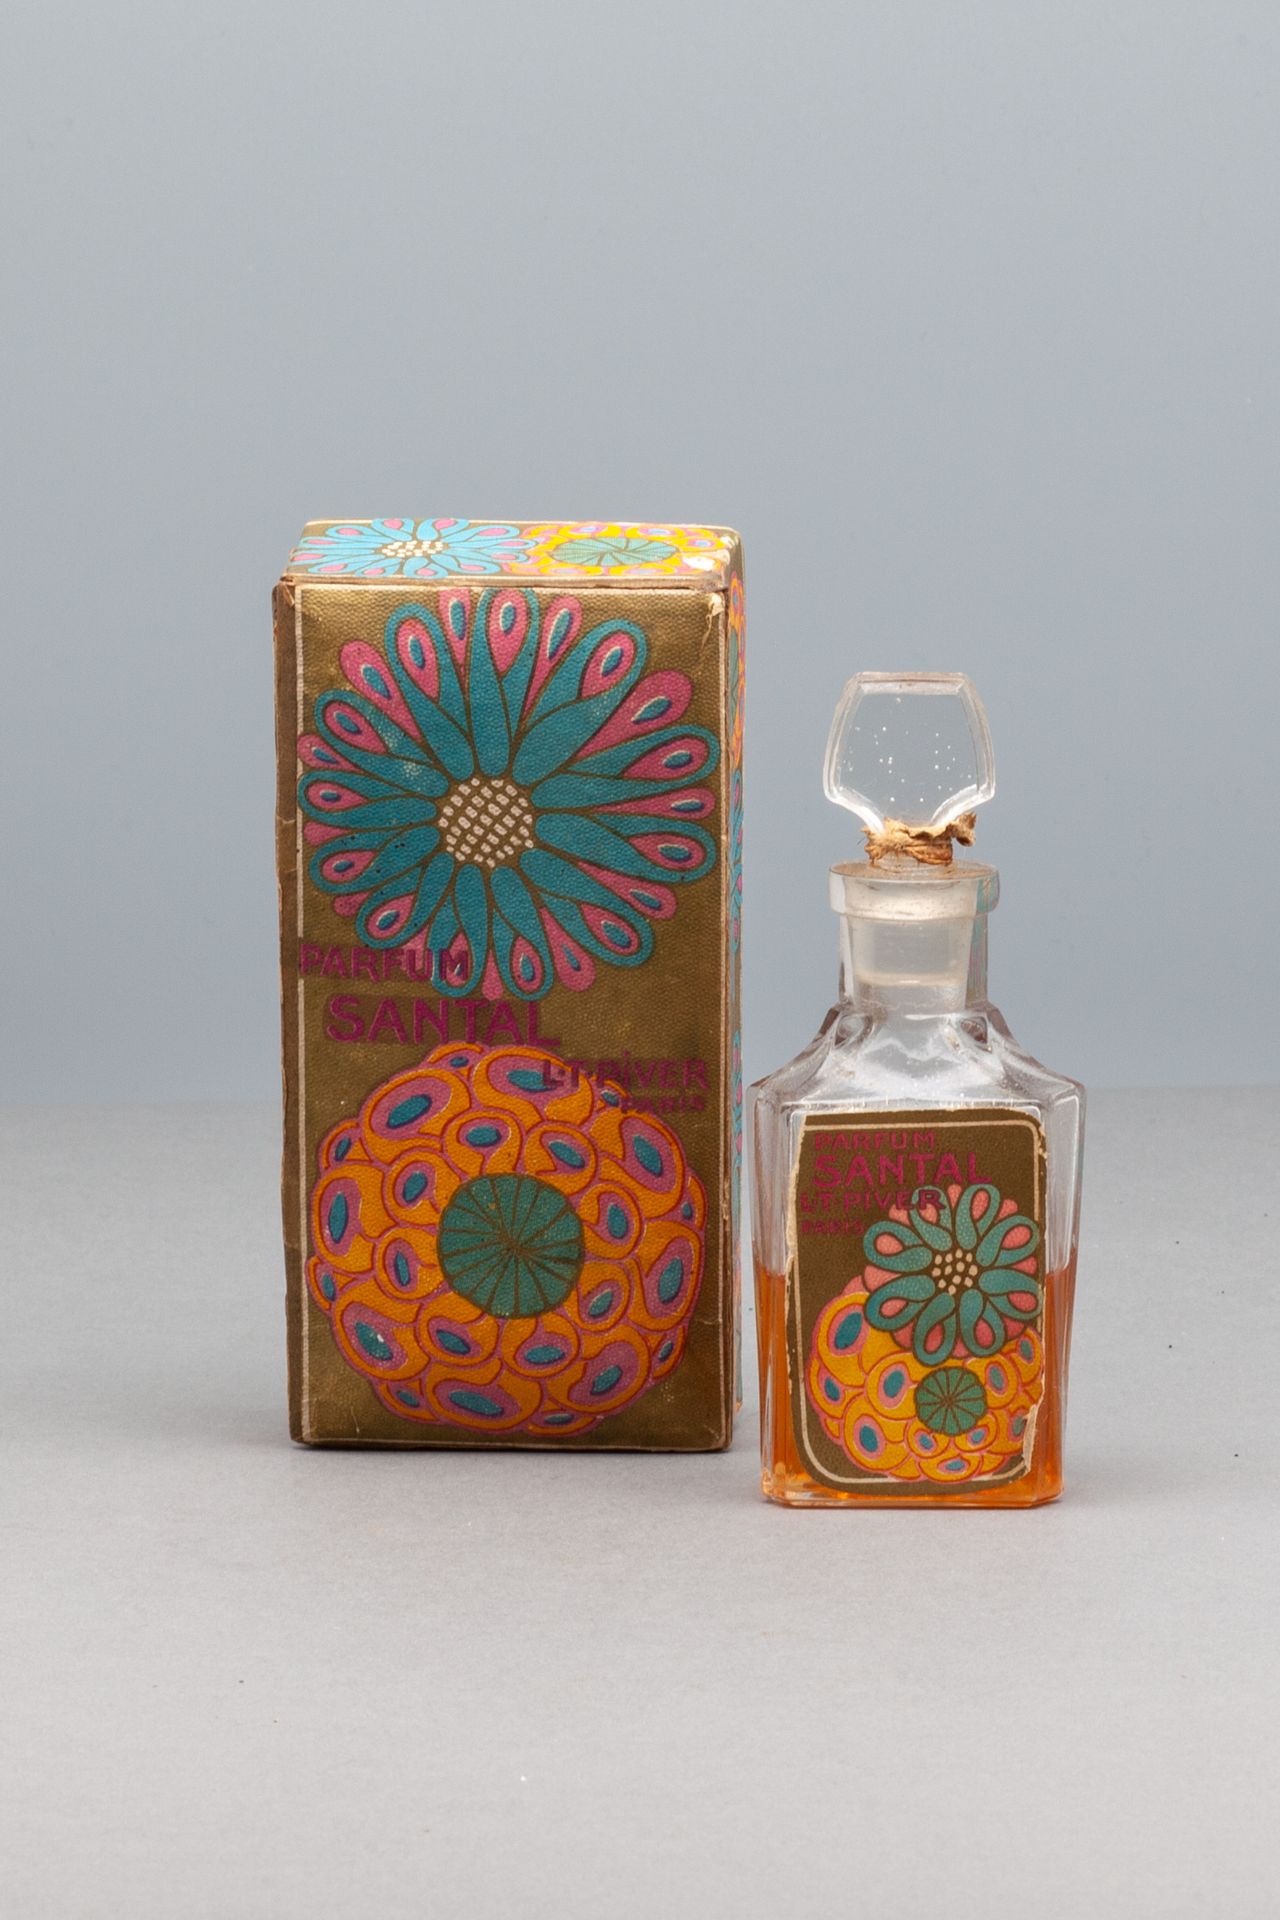 L.T. PIVER "SANTAL" Glass bottle of quadrangular form decorated with its label. &hellip;